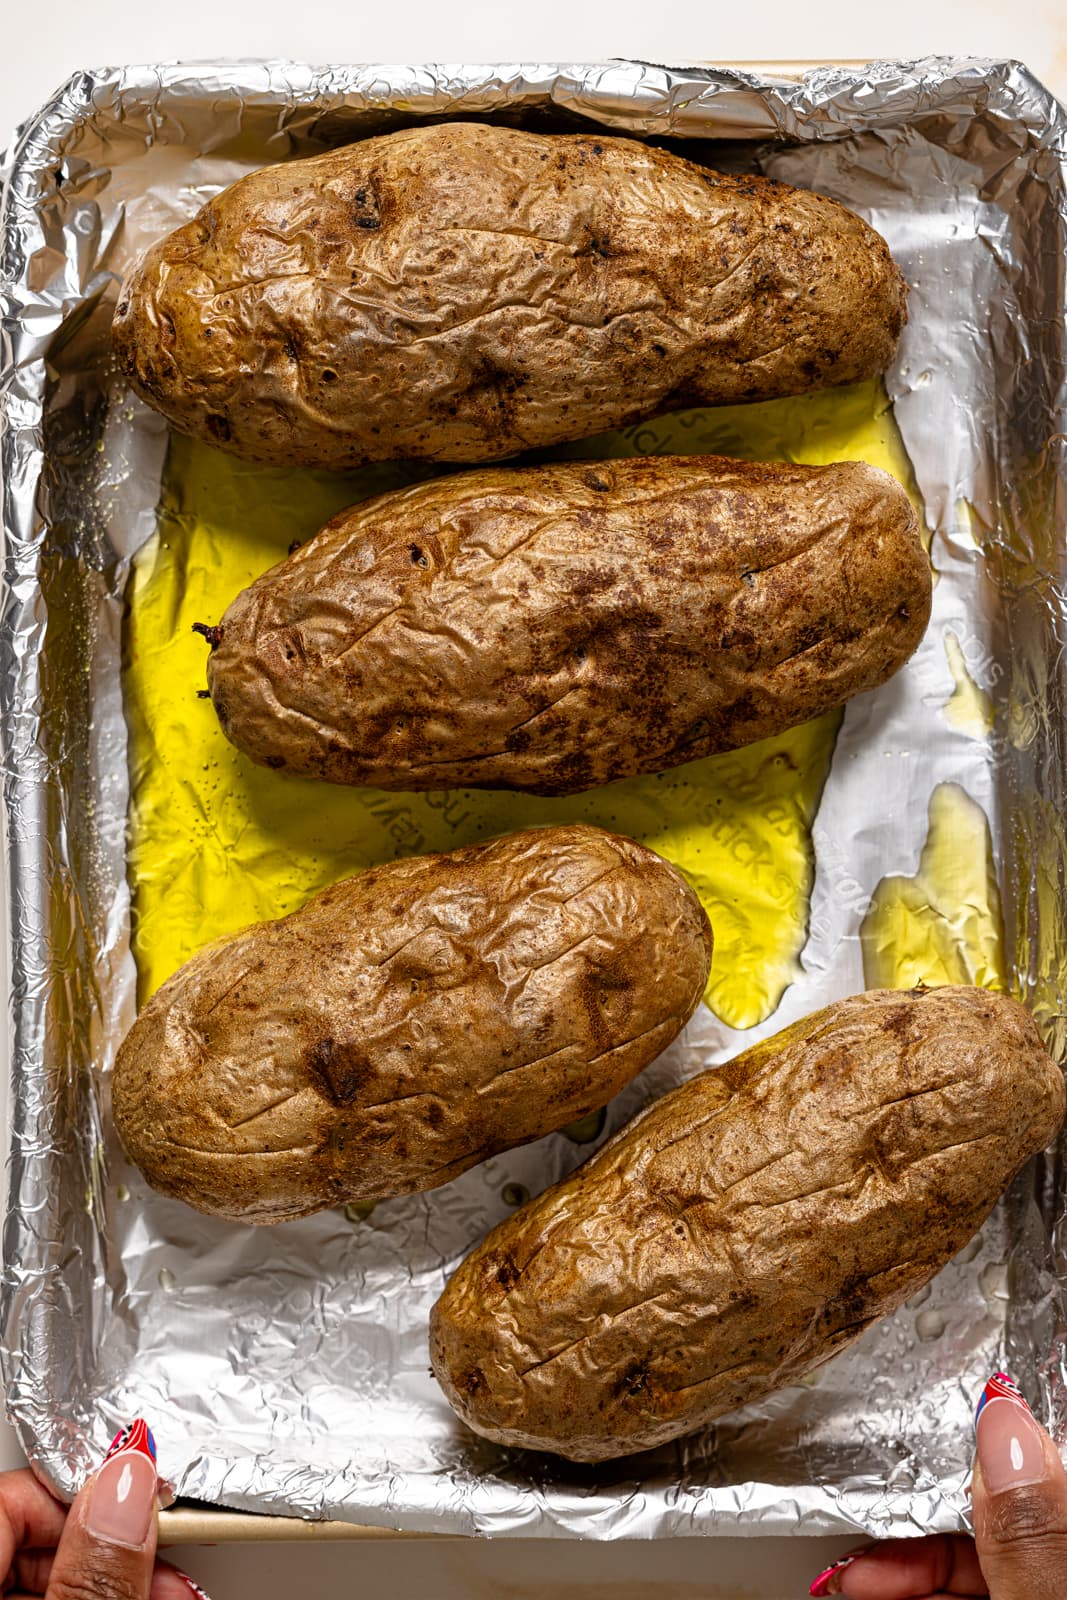 Cooked potatoes on a baking sheet with foil paper.